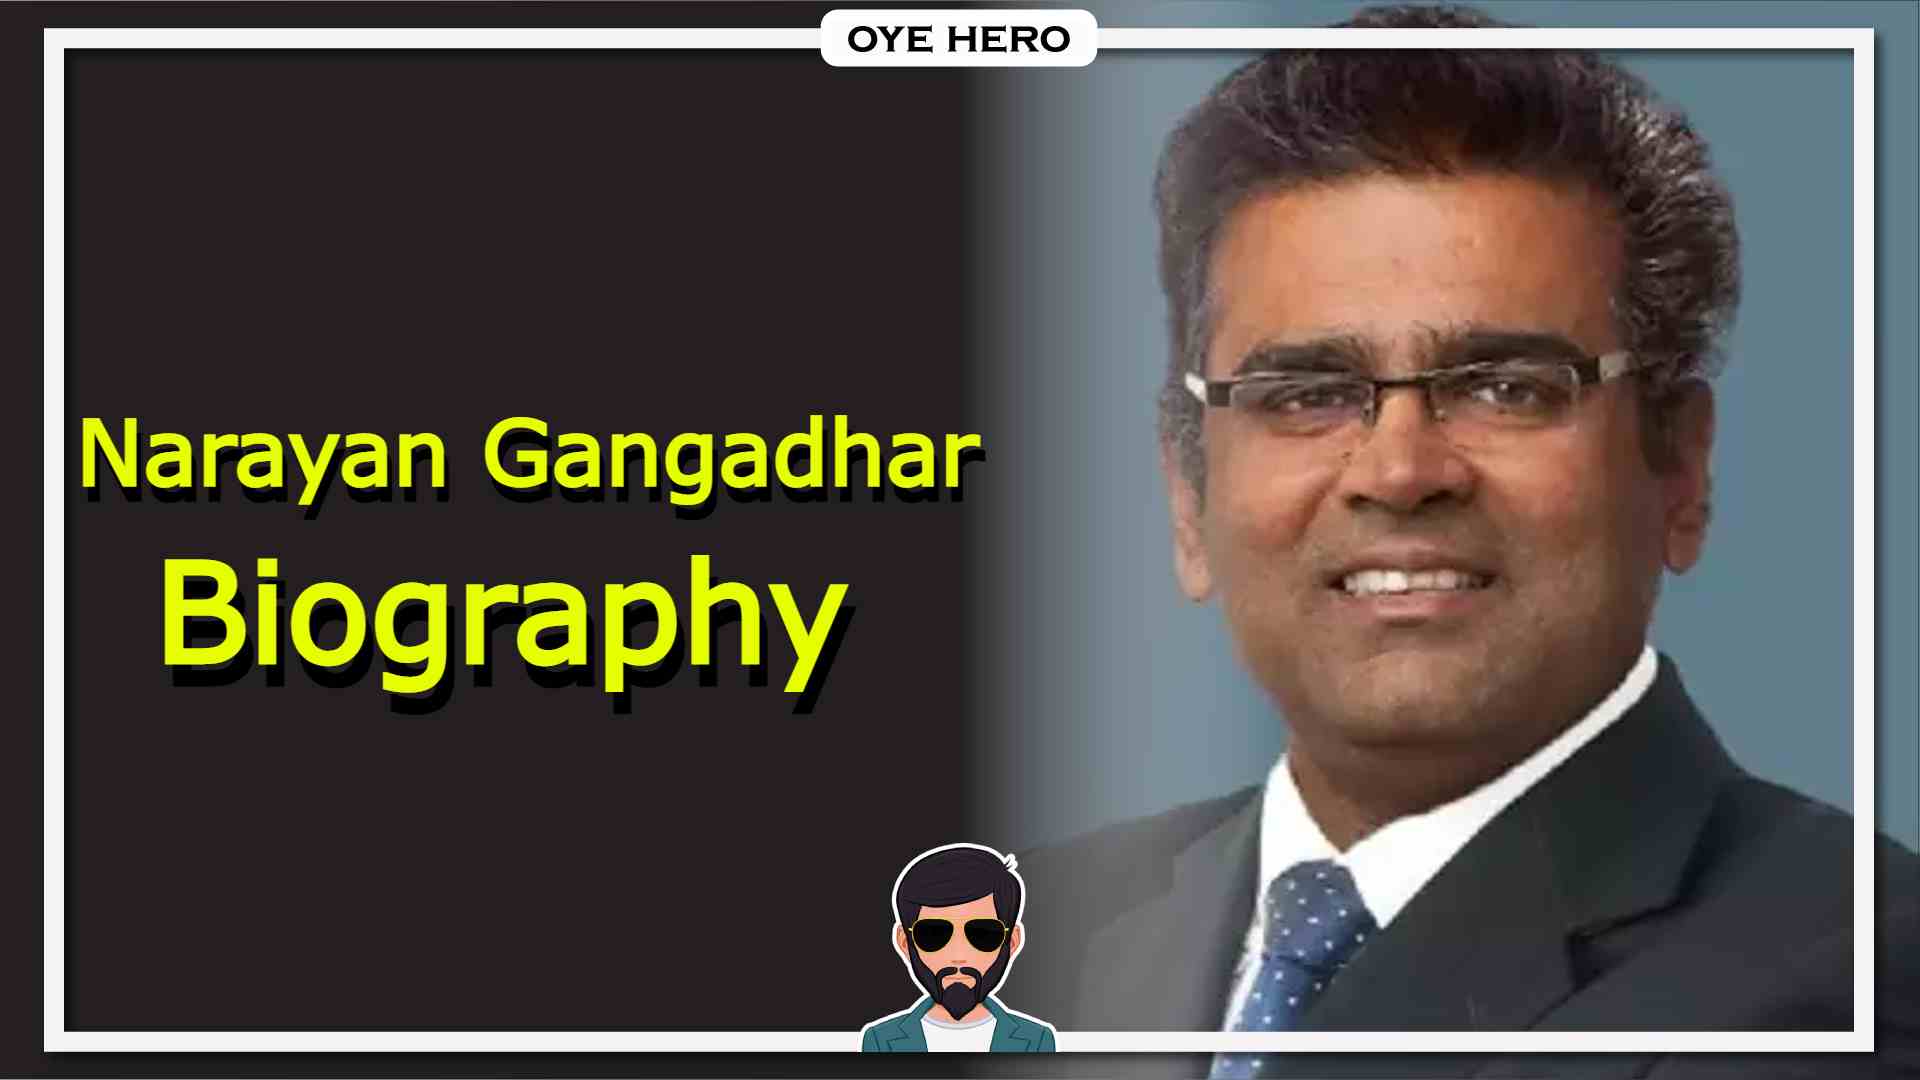 You are currently viewing Narayan Gangadhar Biography & Wikipedia (Angel One CEO) !!